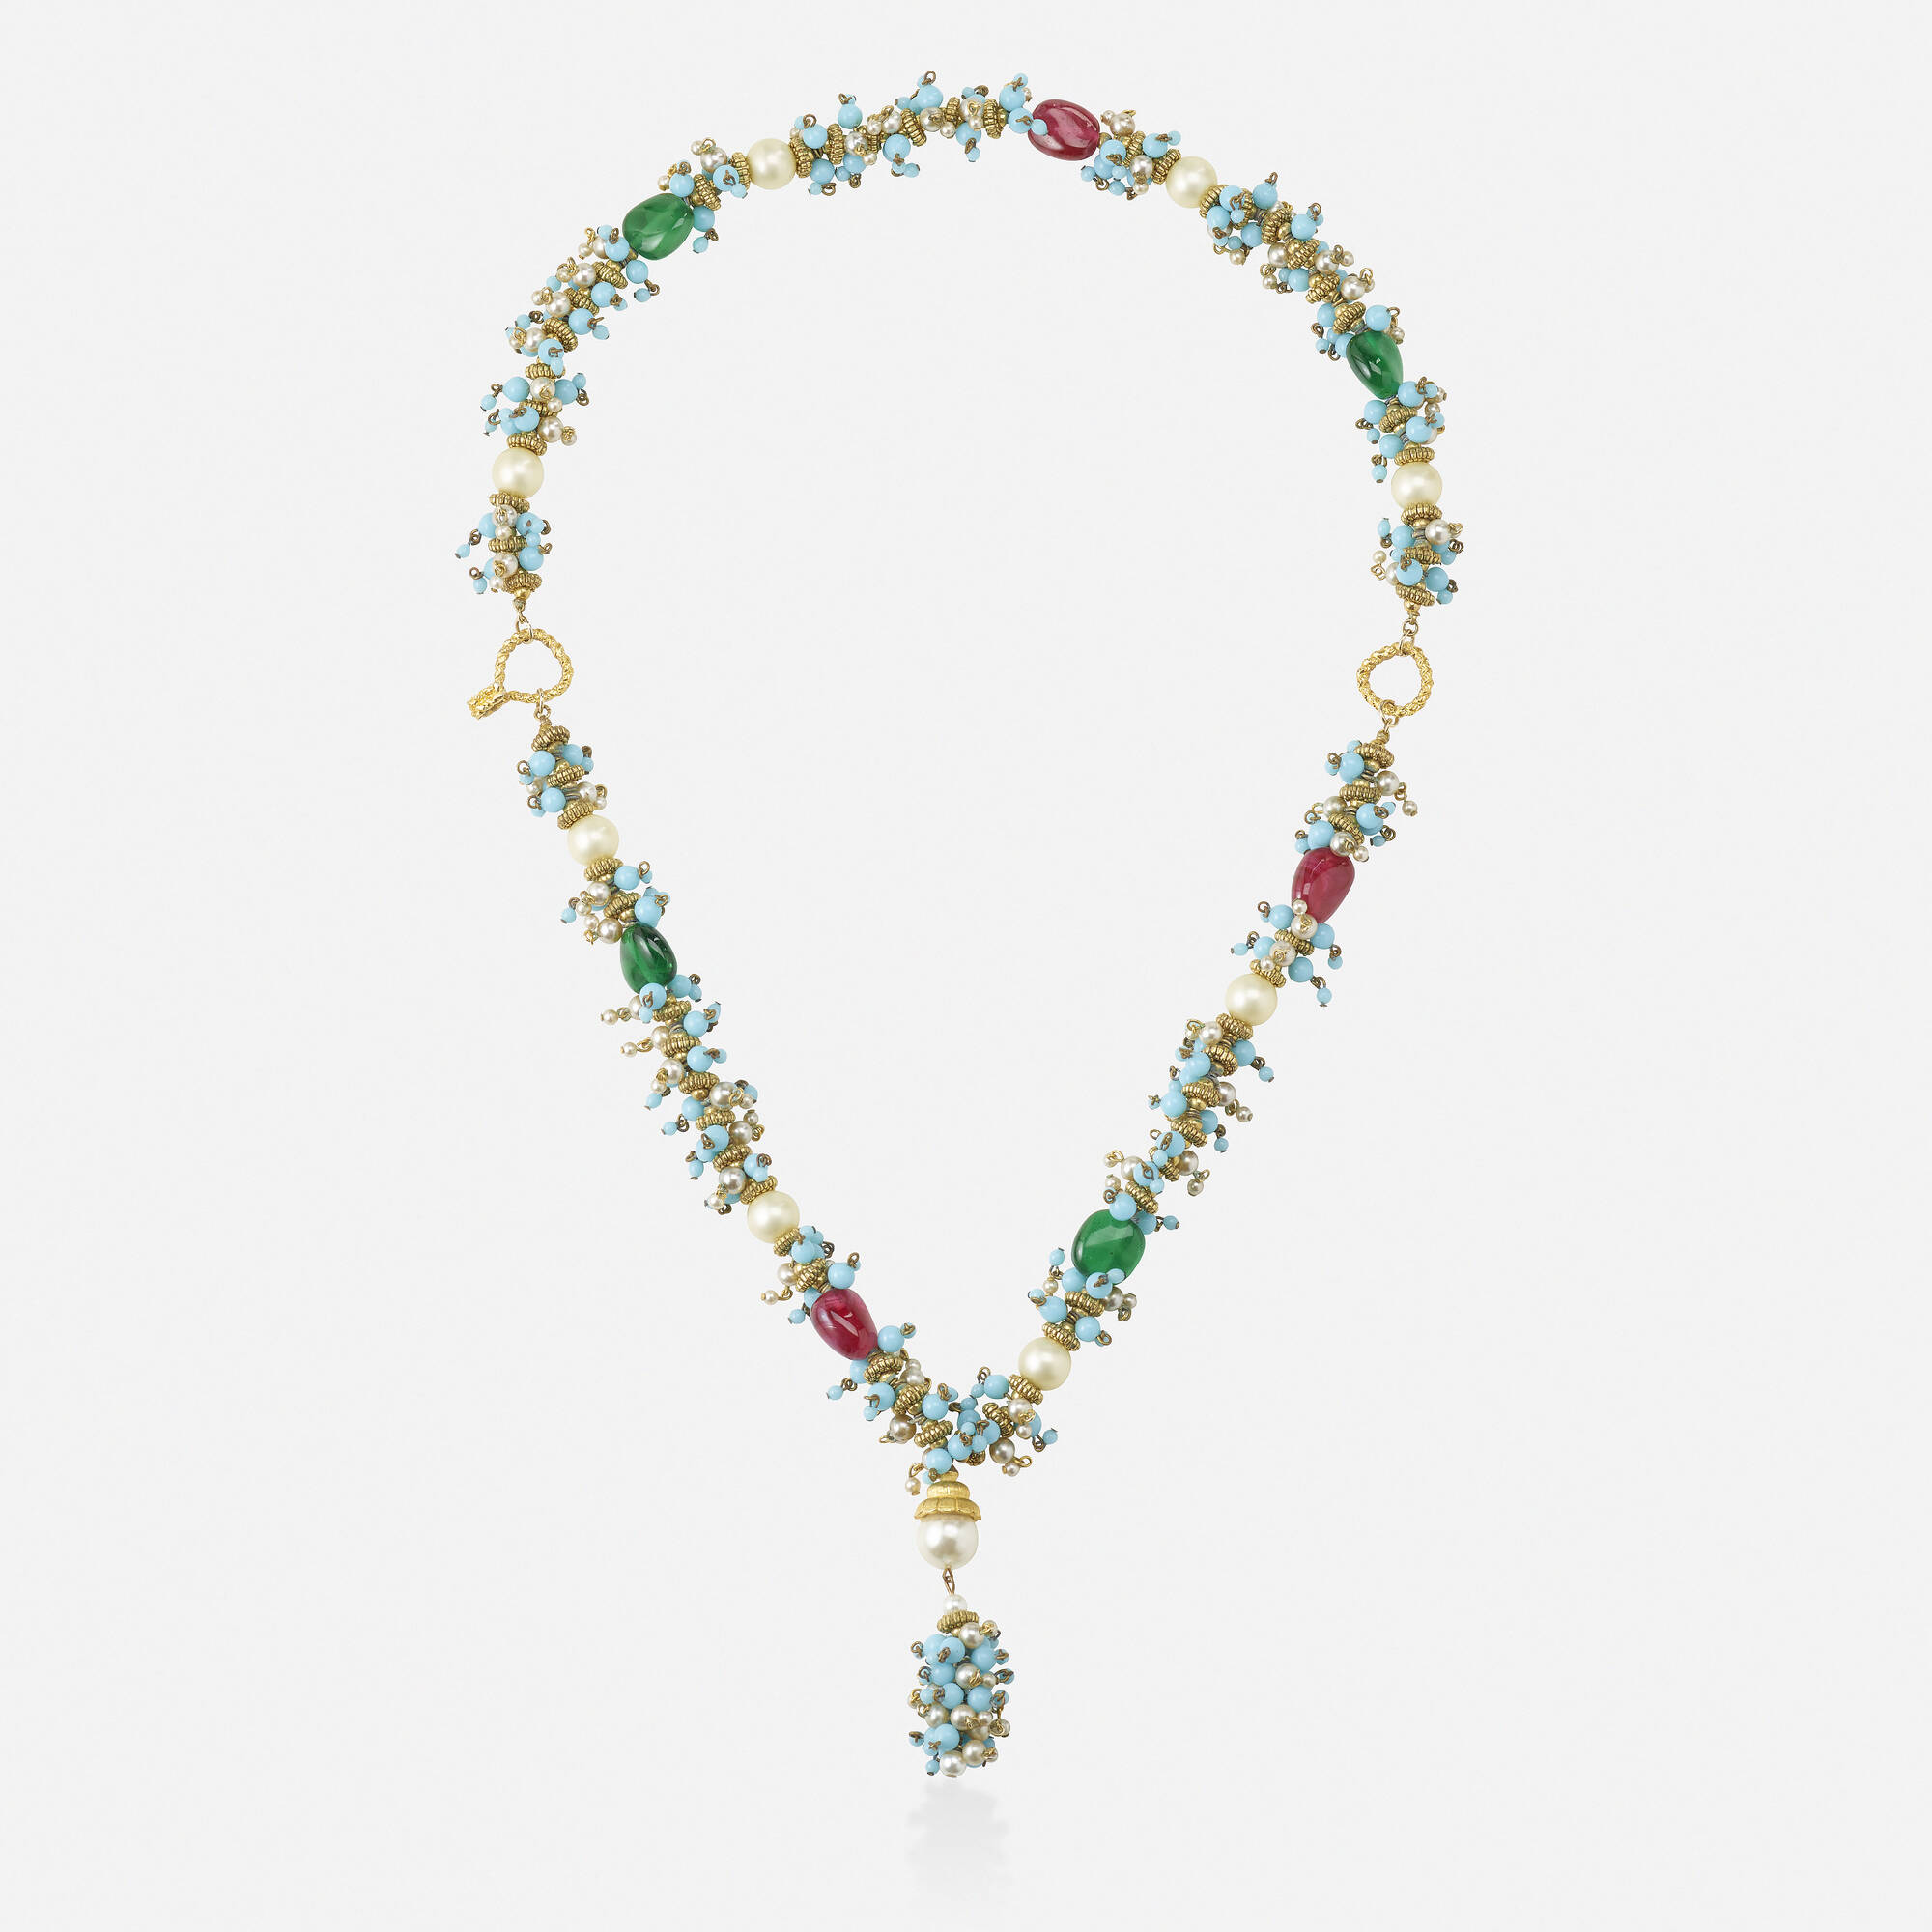 469: MASON GRIPOIX FOR CHANEL, Necklace < Spring Jewels, 5 May 